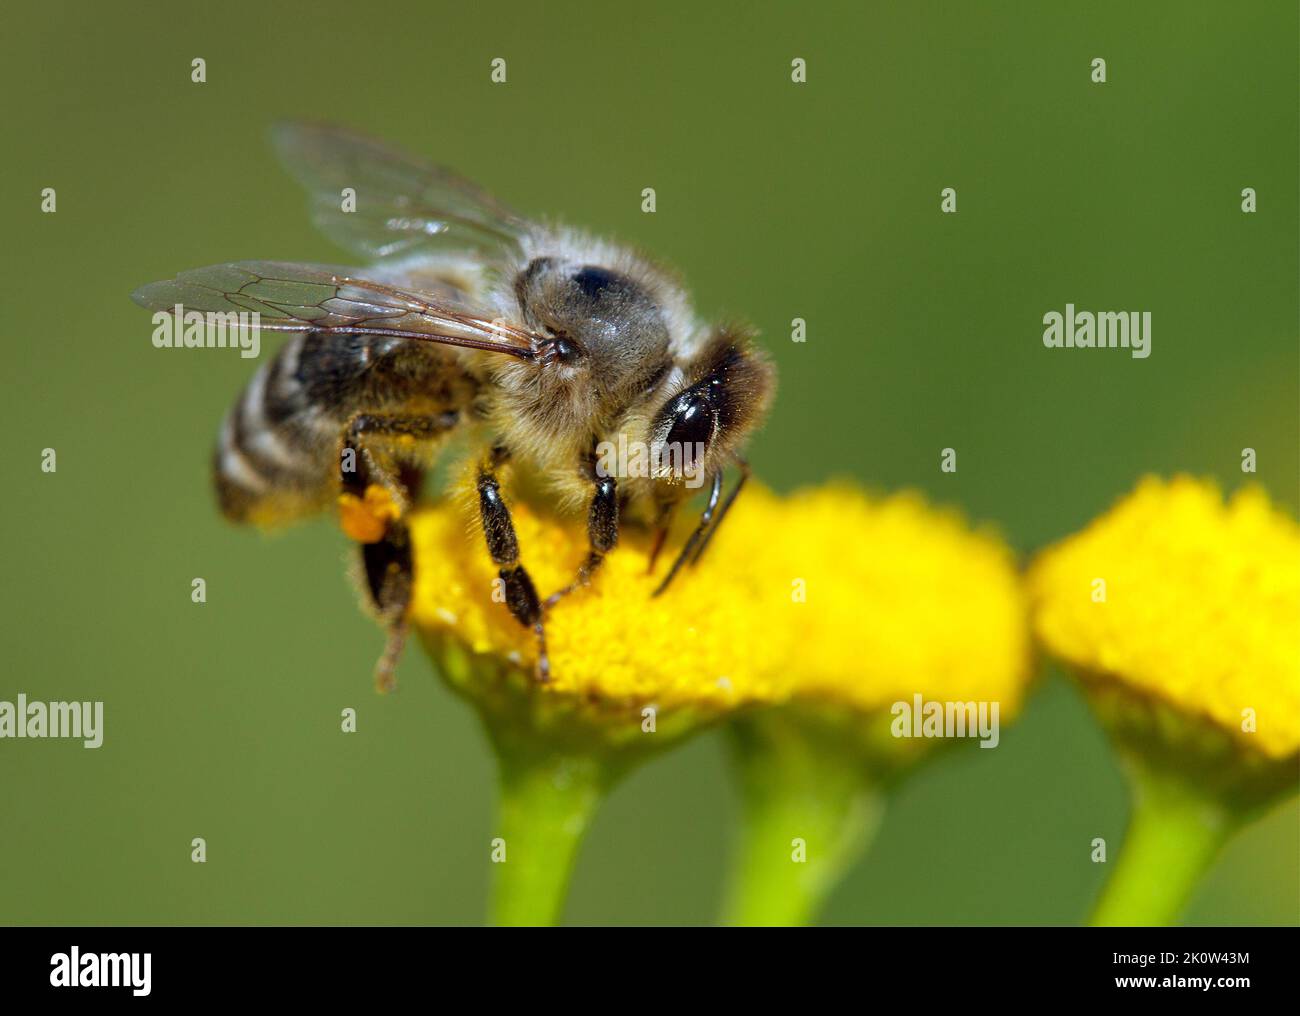 detail of bee or honeybee in Latin Apis Mellifera, european or western honey bee pollinated of the yellow flower Stock Photo